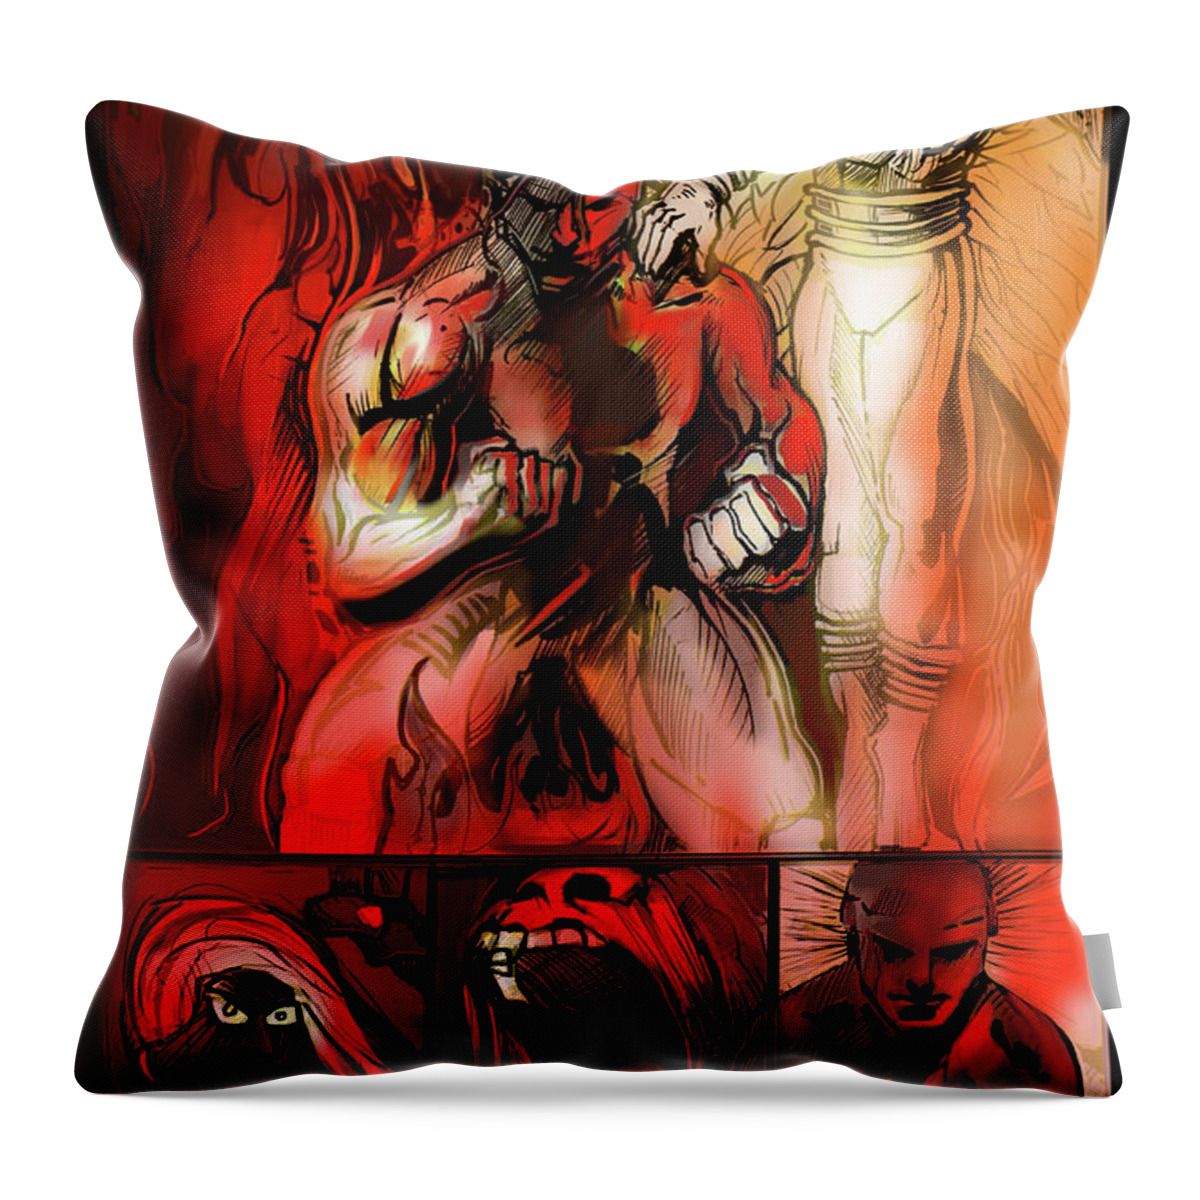 Play With Fire Throw Pillow featuring the painting Play With Fire by John Gholson